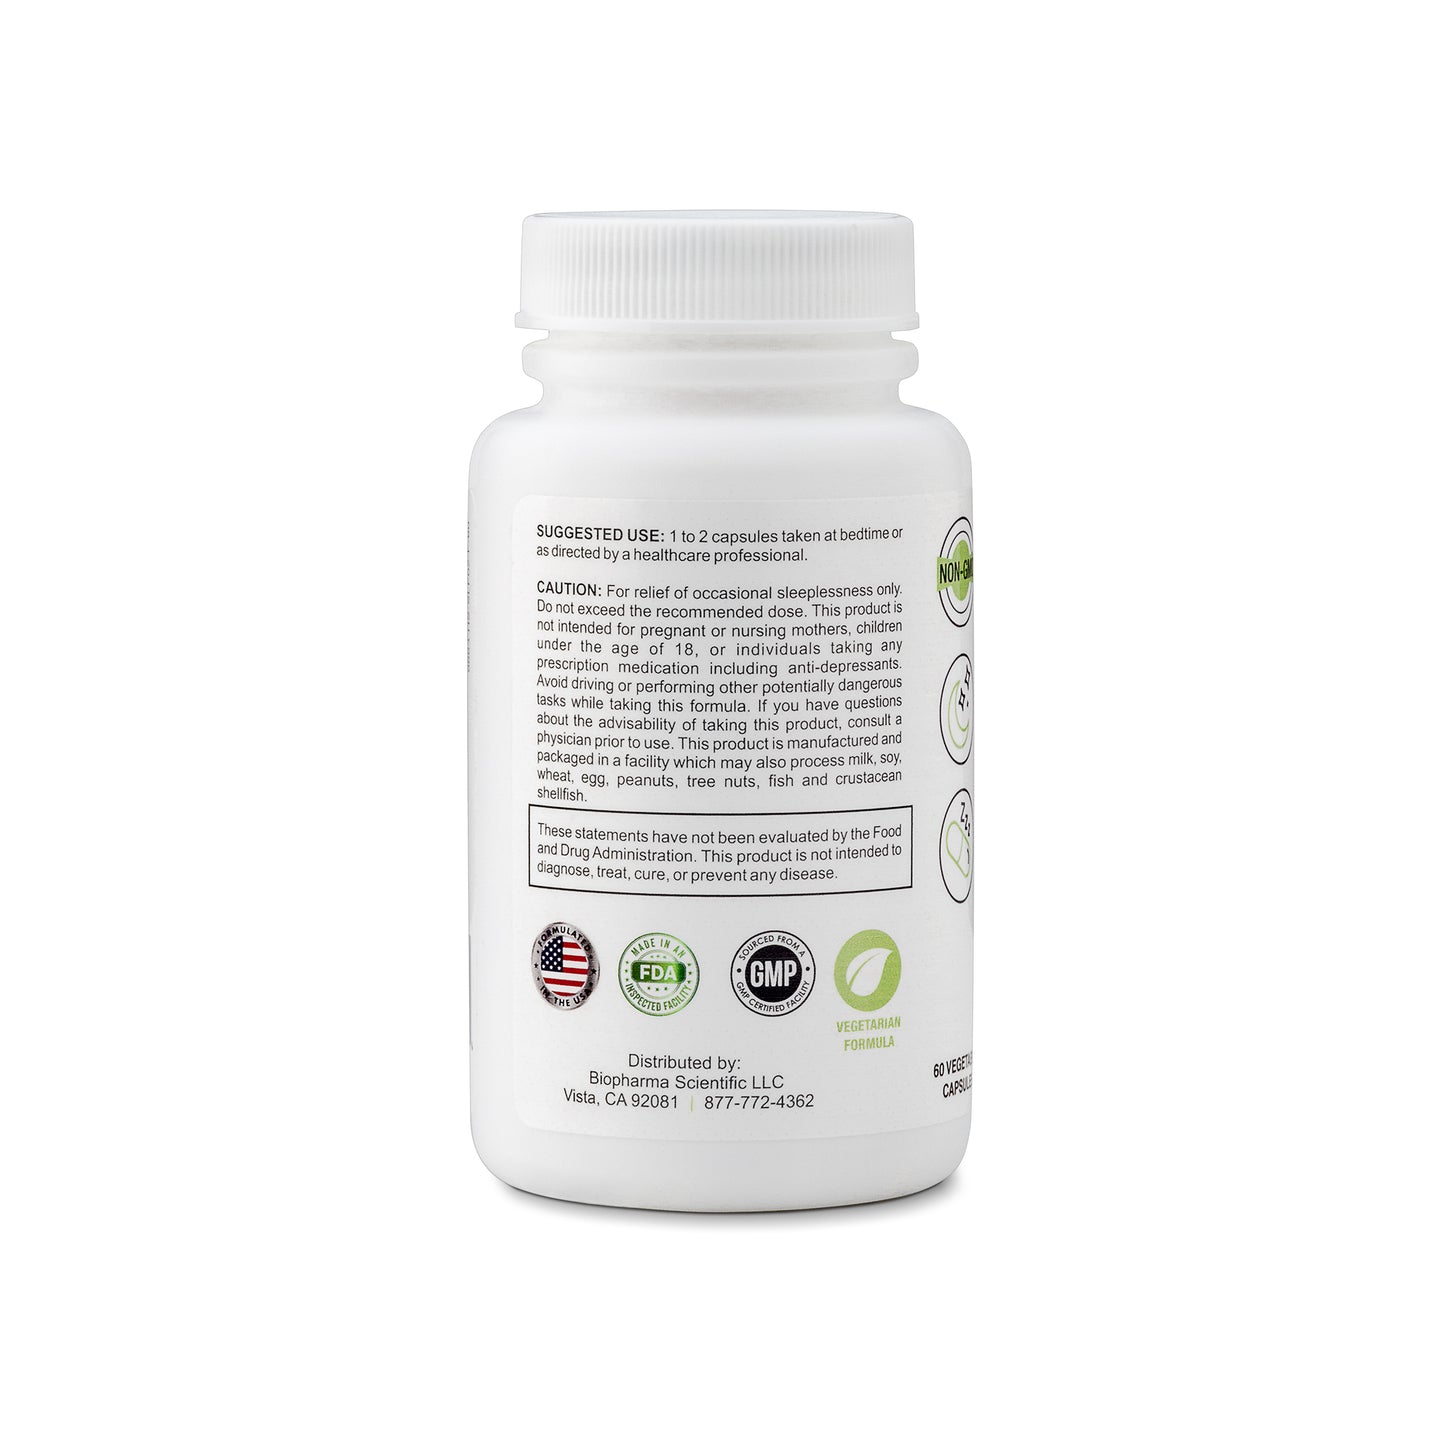 nanosnooze sleep support supplement capsule with l-theanine melatonin magnesium - additional information